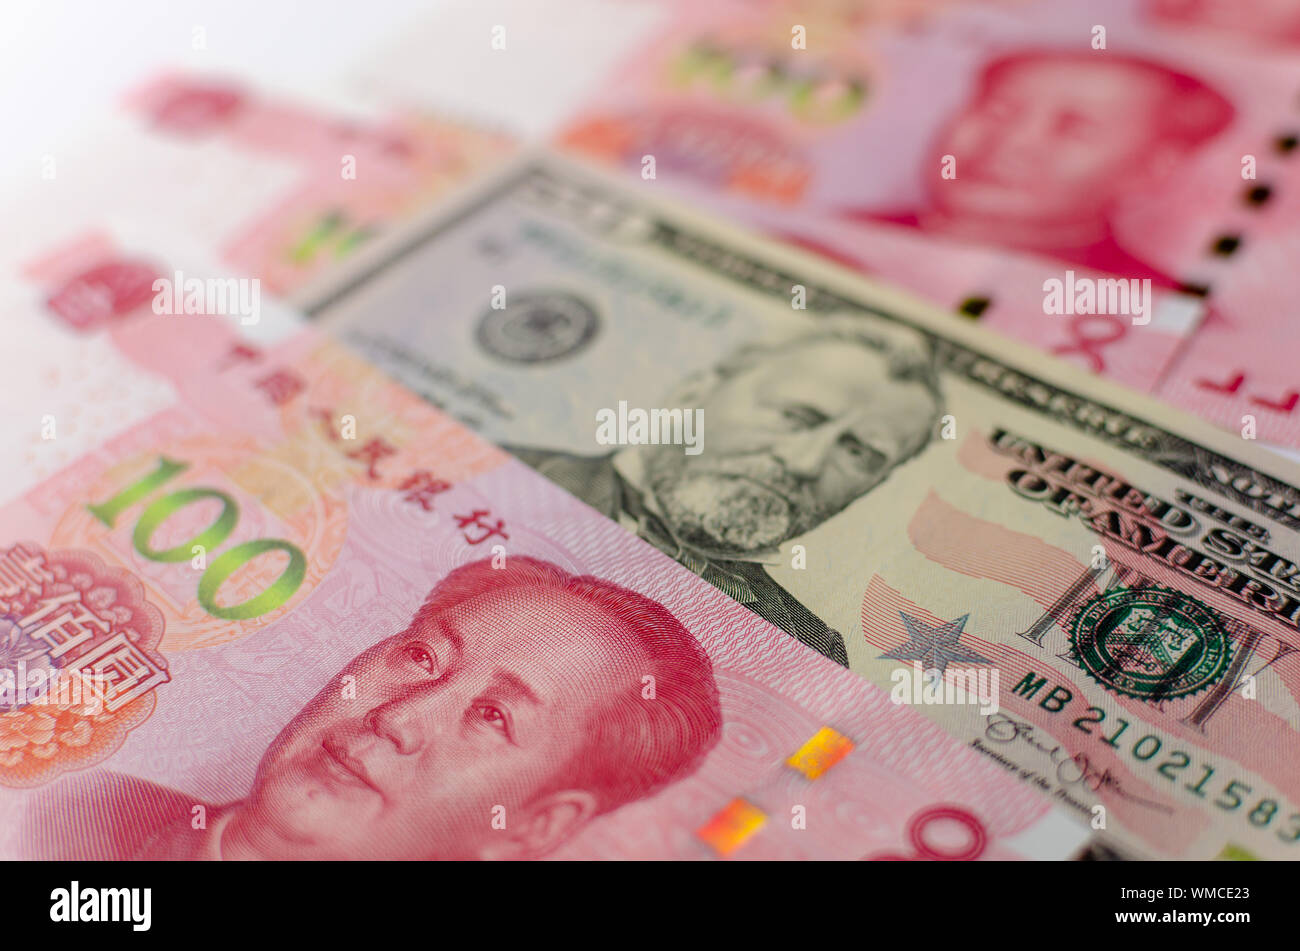 Chinese 100 Yuan banknotes and American 50 dollar bill between them. Close up image of currency of China and United States. Stock Photo